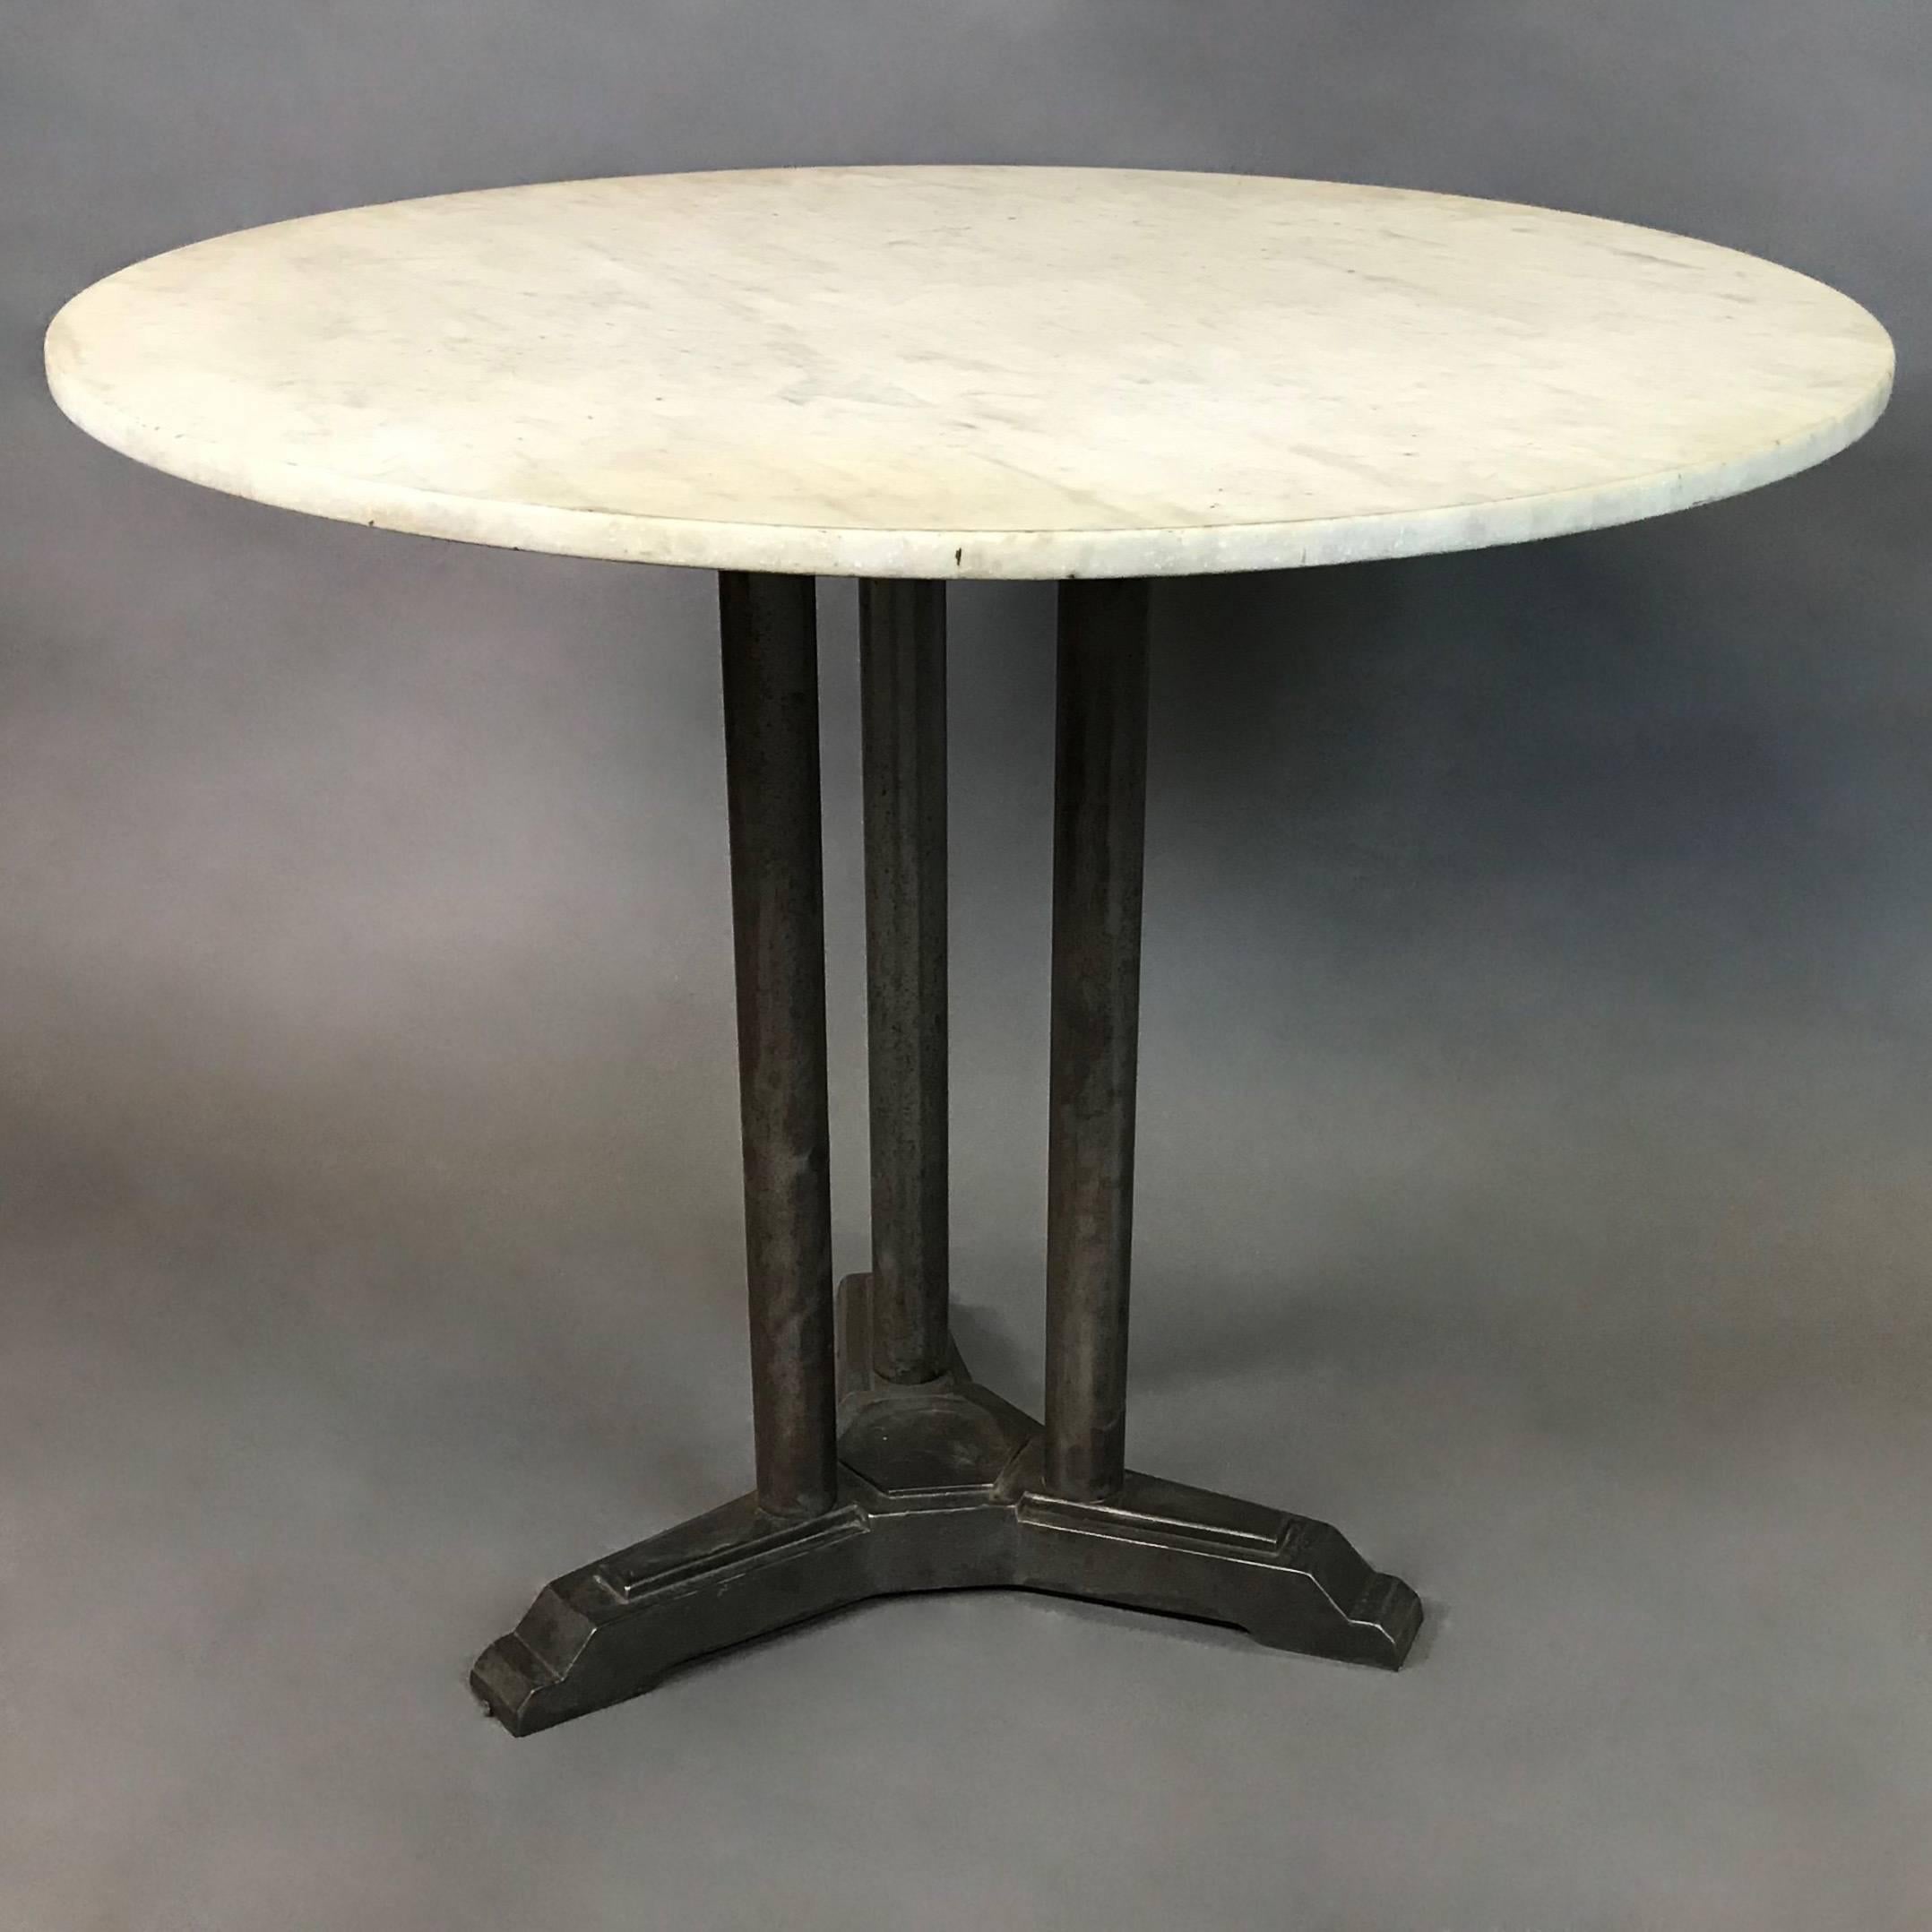 Art Deco, café, bistro, dining table features a round white marble top with stepped, cast iron, three stem pedestal base.